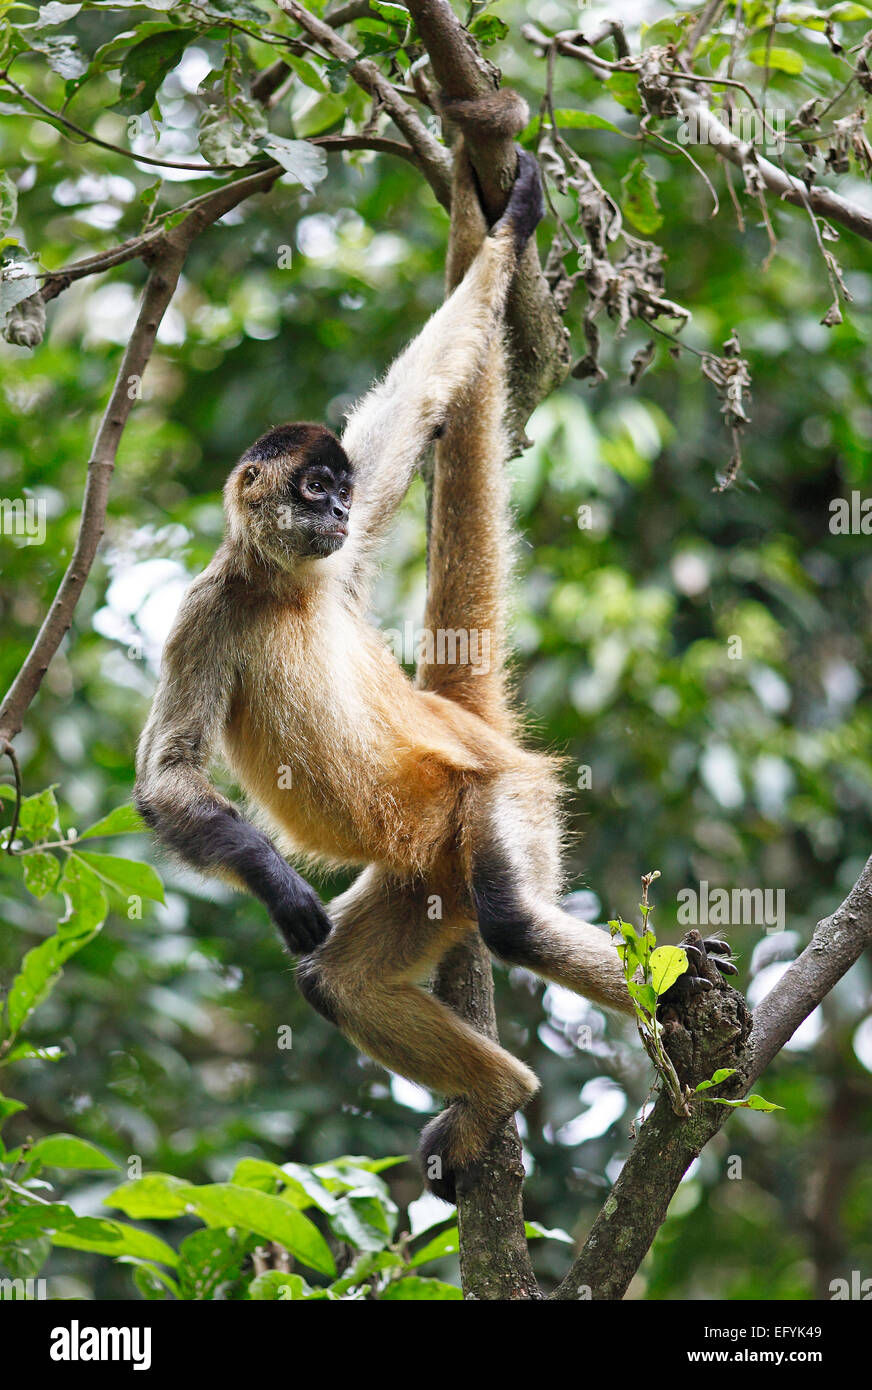 Central American Spider Monkey or Geoffroy's Spider Monkey (Ateles geoffroyi), climbing on a tree, Alajuela province, Costa Rica Stock Photo